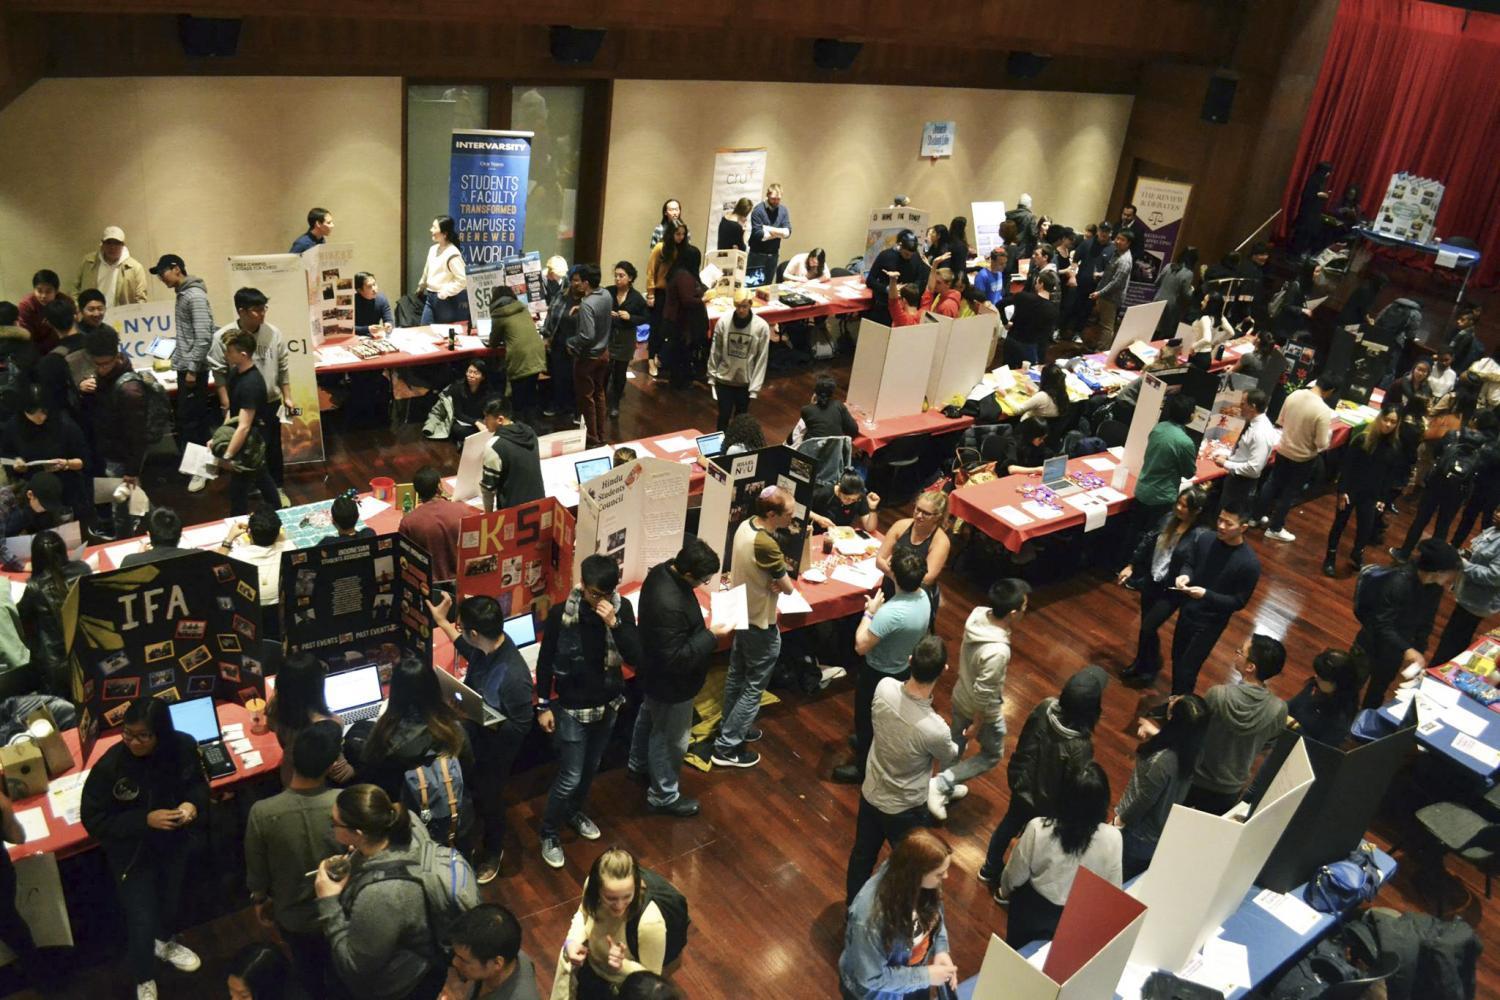 Club Fest showcases all of the different extracurricular clubs at NYU, giving students the opportunity to sign up for a number of activities.
